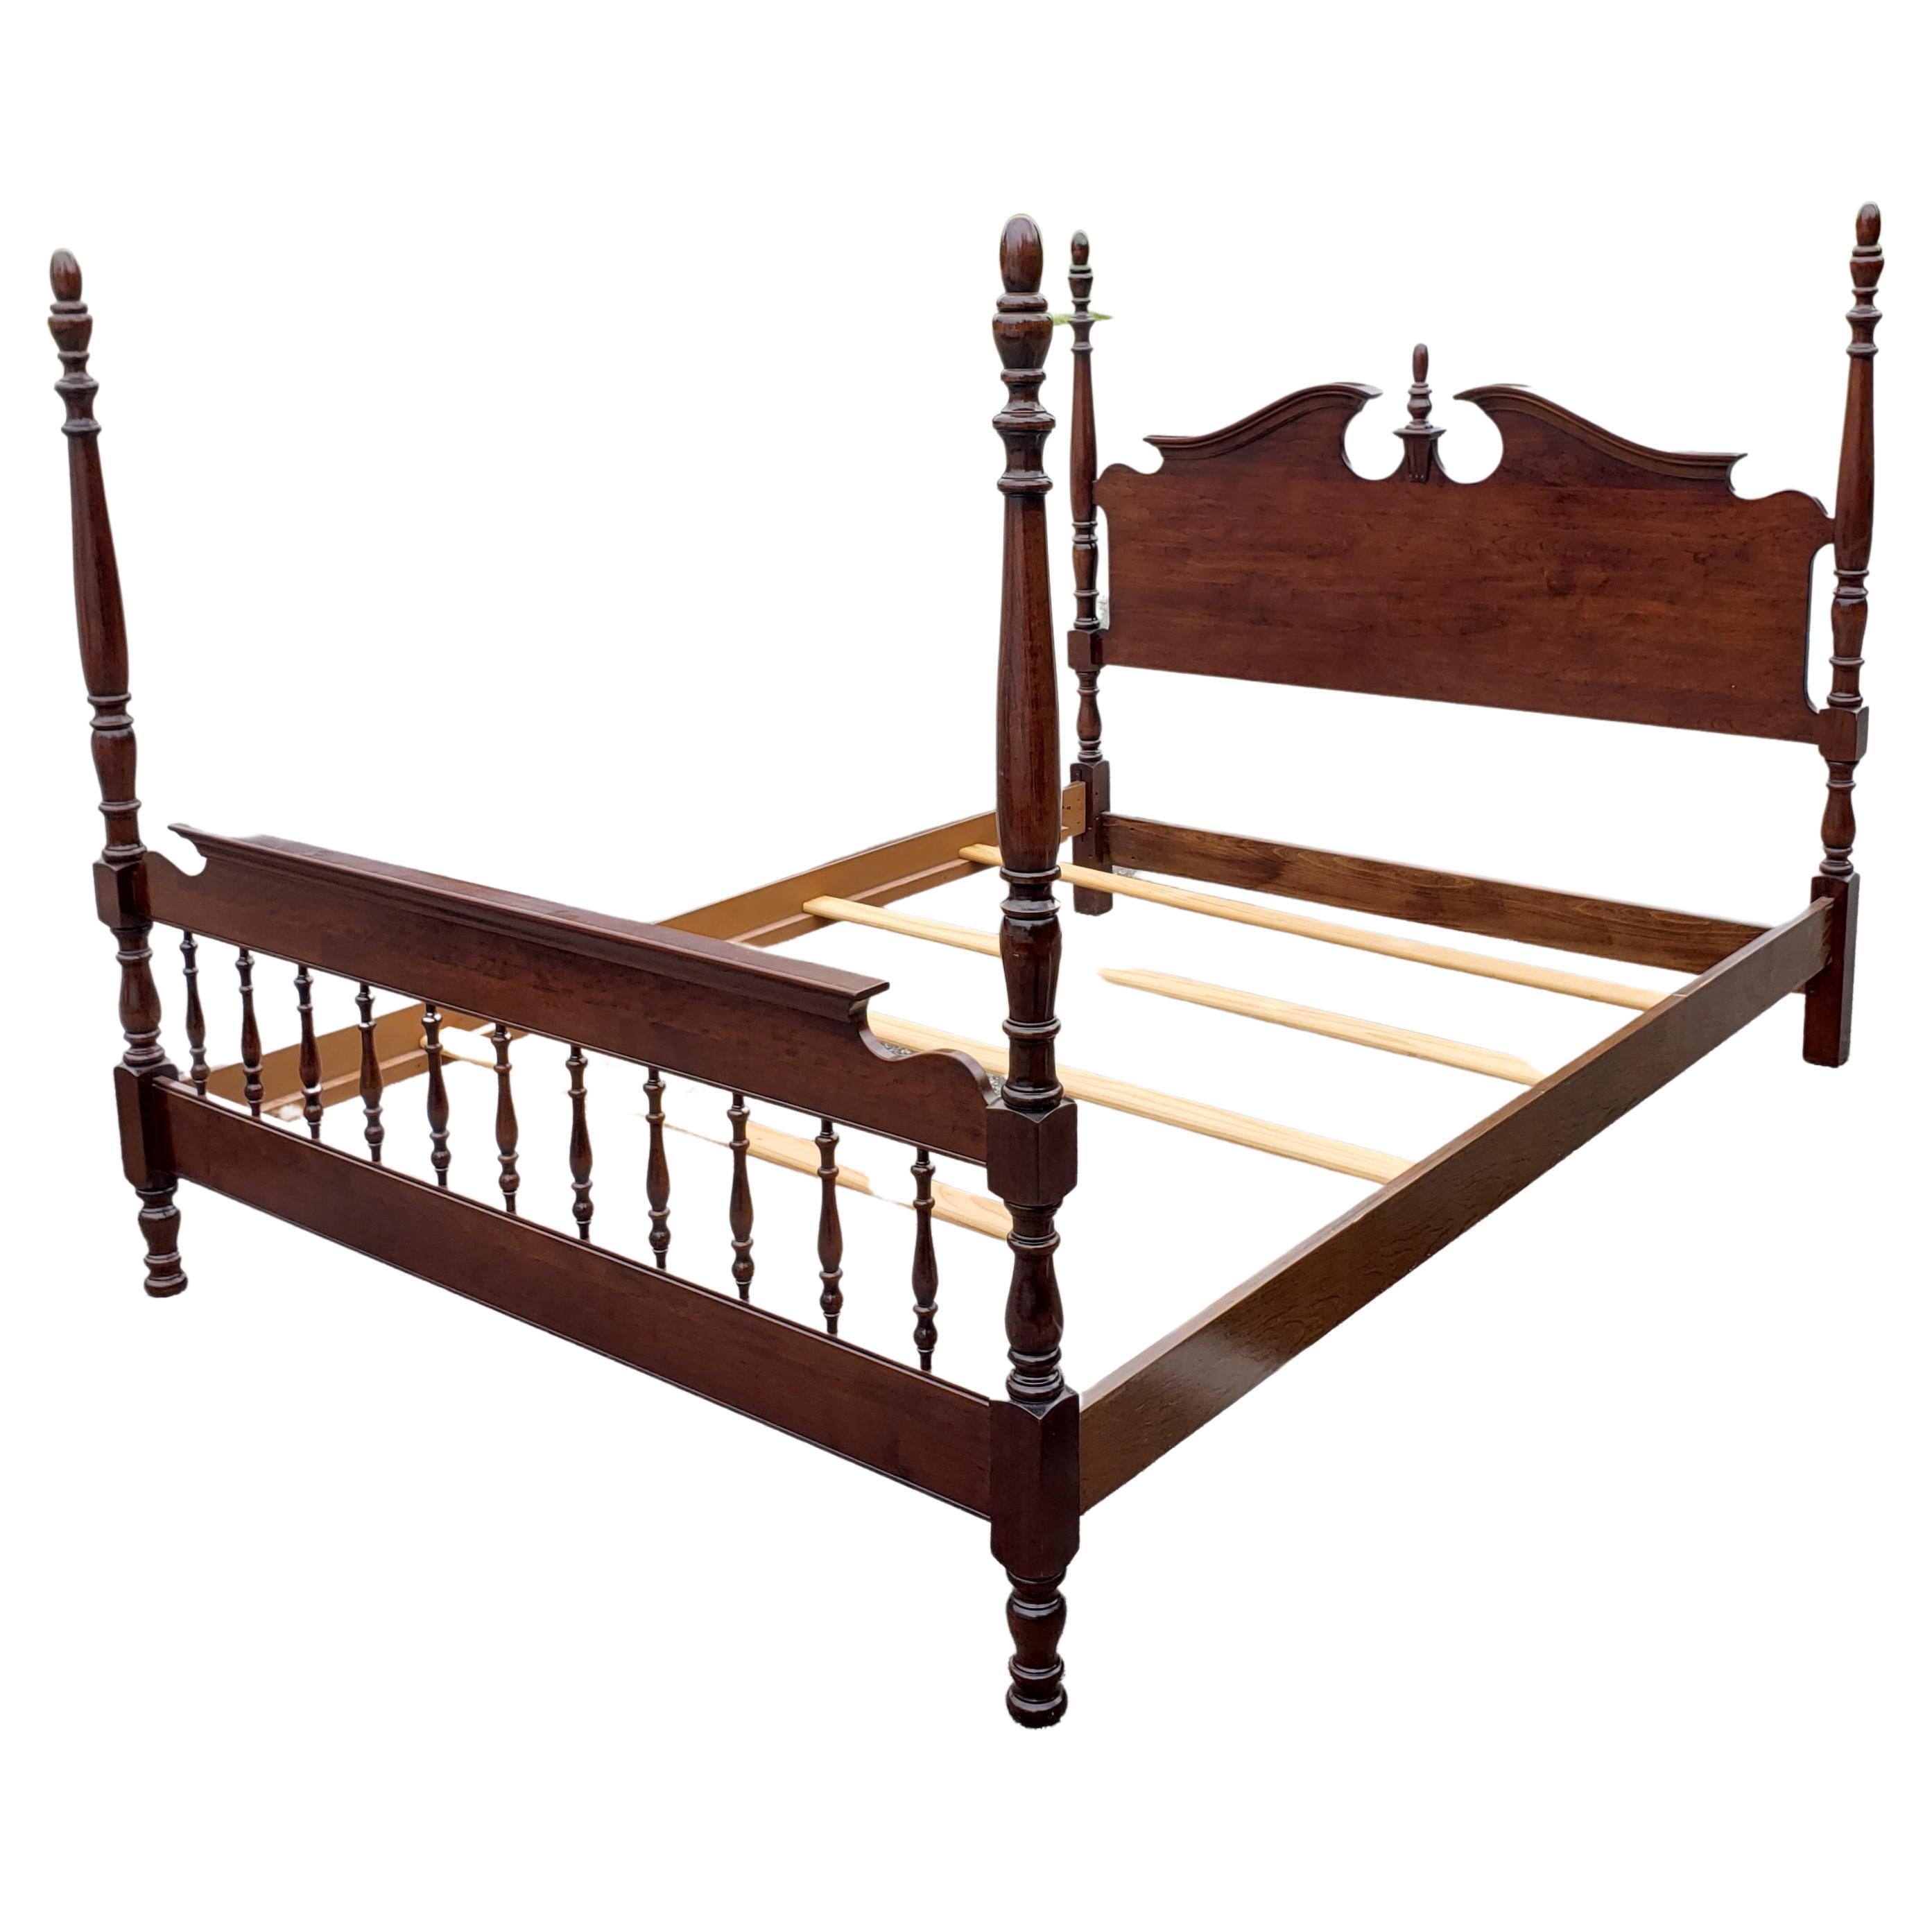 A Pennsylvania House Solid Cherry Queen size semi poster bed frame in very good vintage condition. Very minor signs of use. Original finish in excellent condition.. Measures 63.25